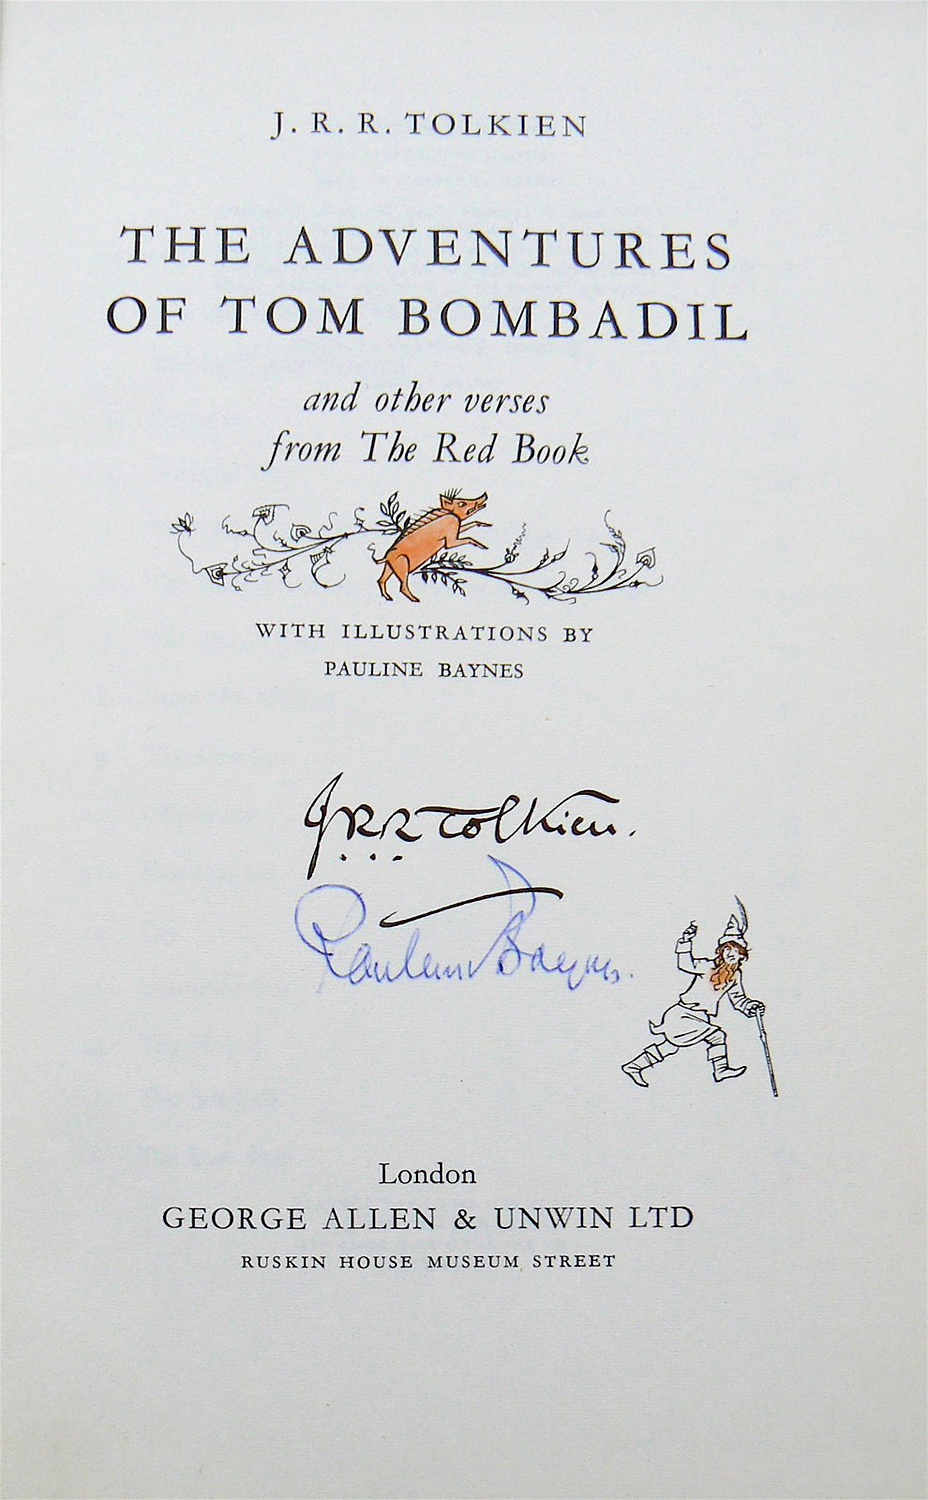 The Adventures of Tom Bombadil | Première édition anglaise chez Georges Allen and Unwin